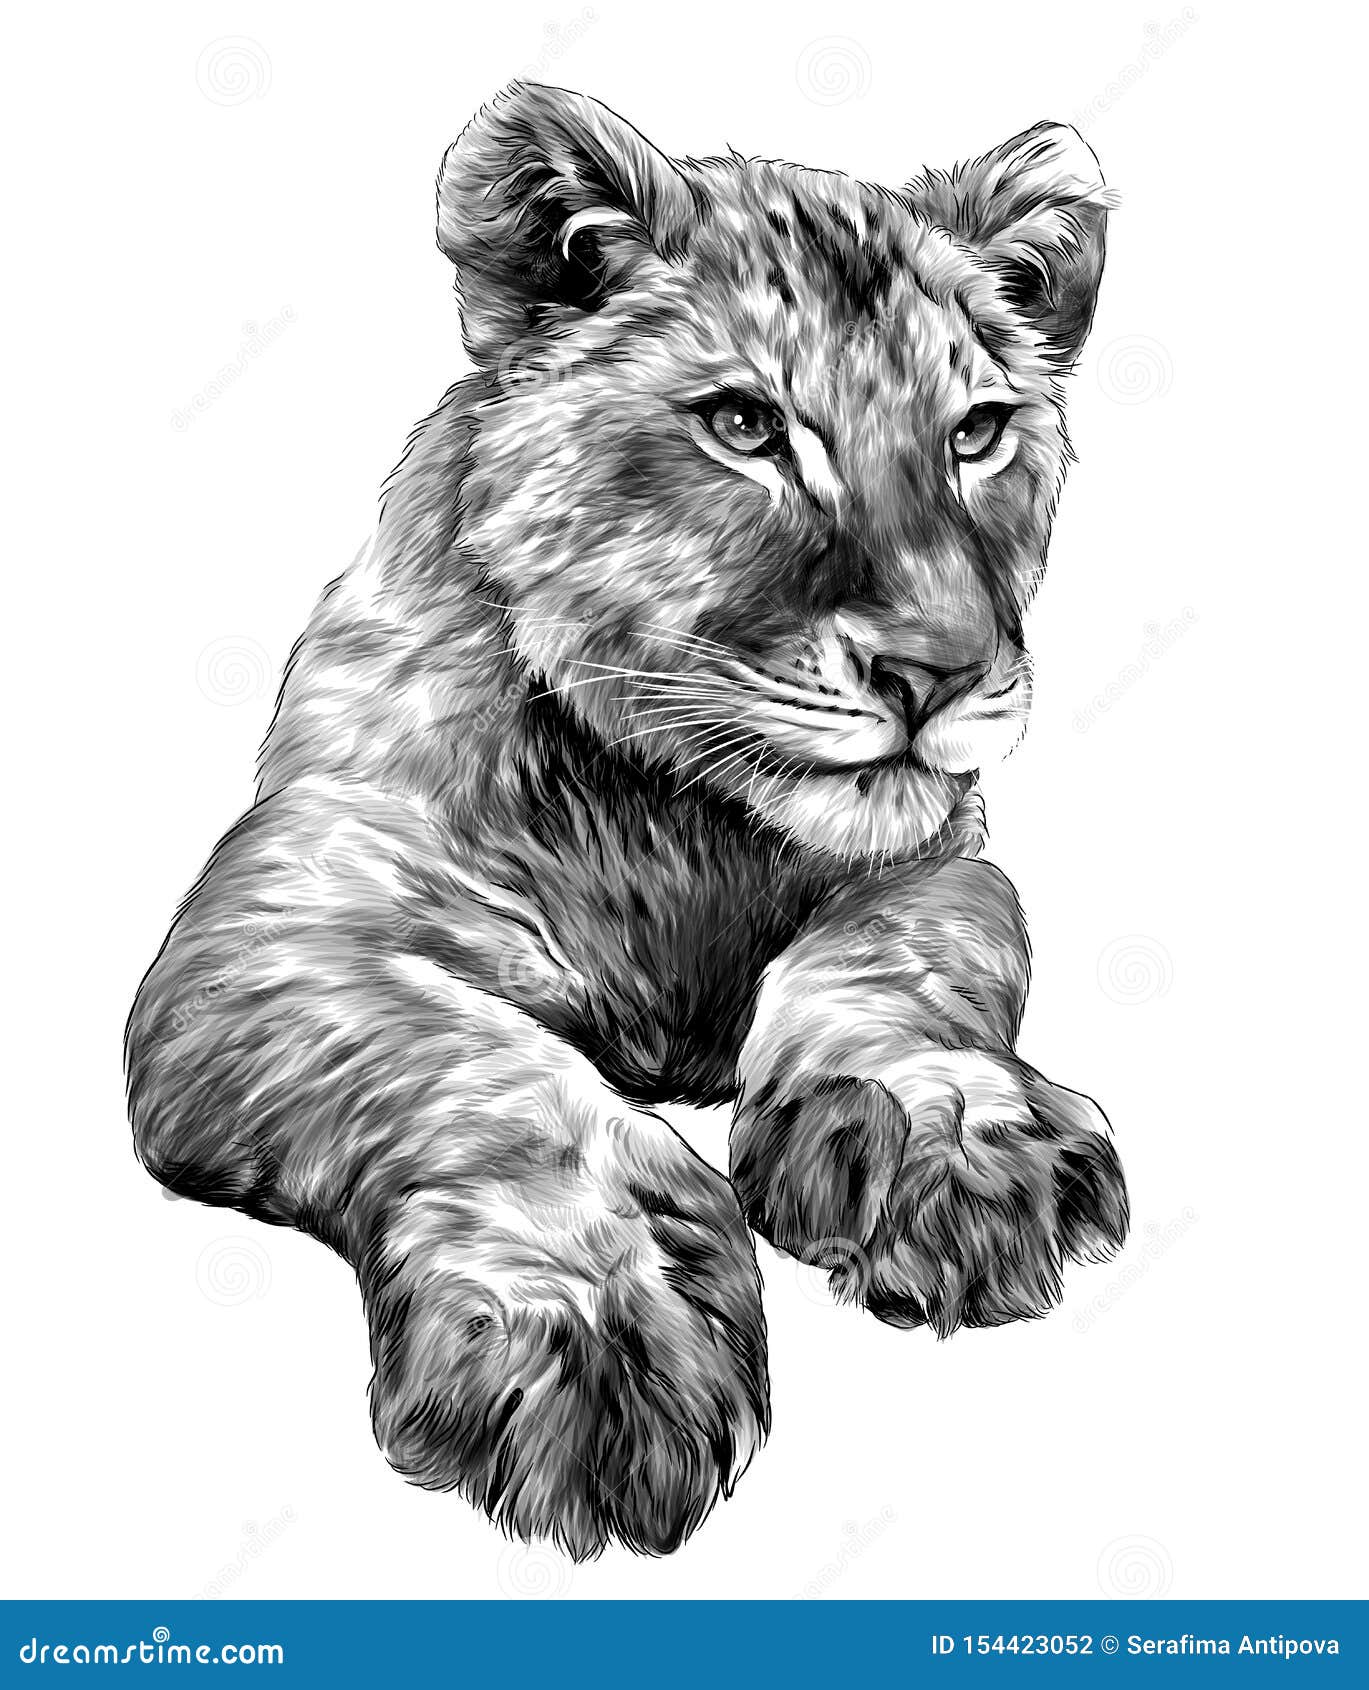 Guardian, Open Edition Wildlife Lioness and Lion Cub Drawing Art Print -  Etsy